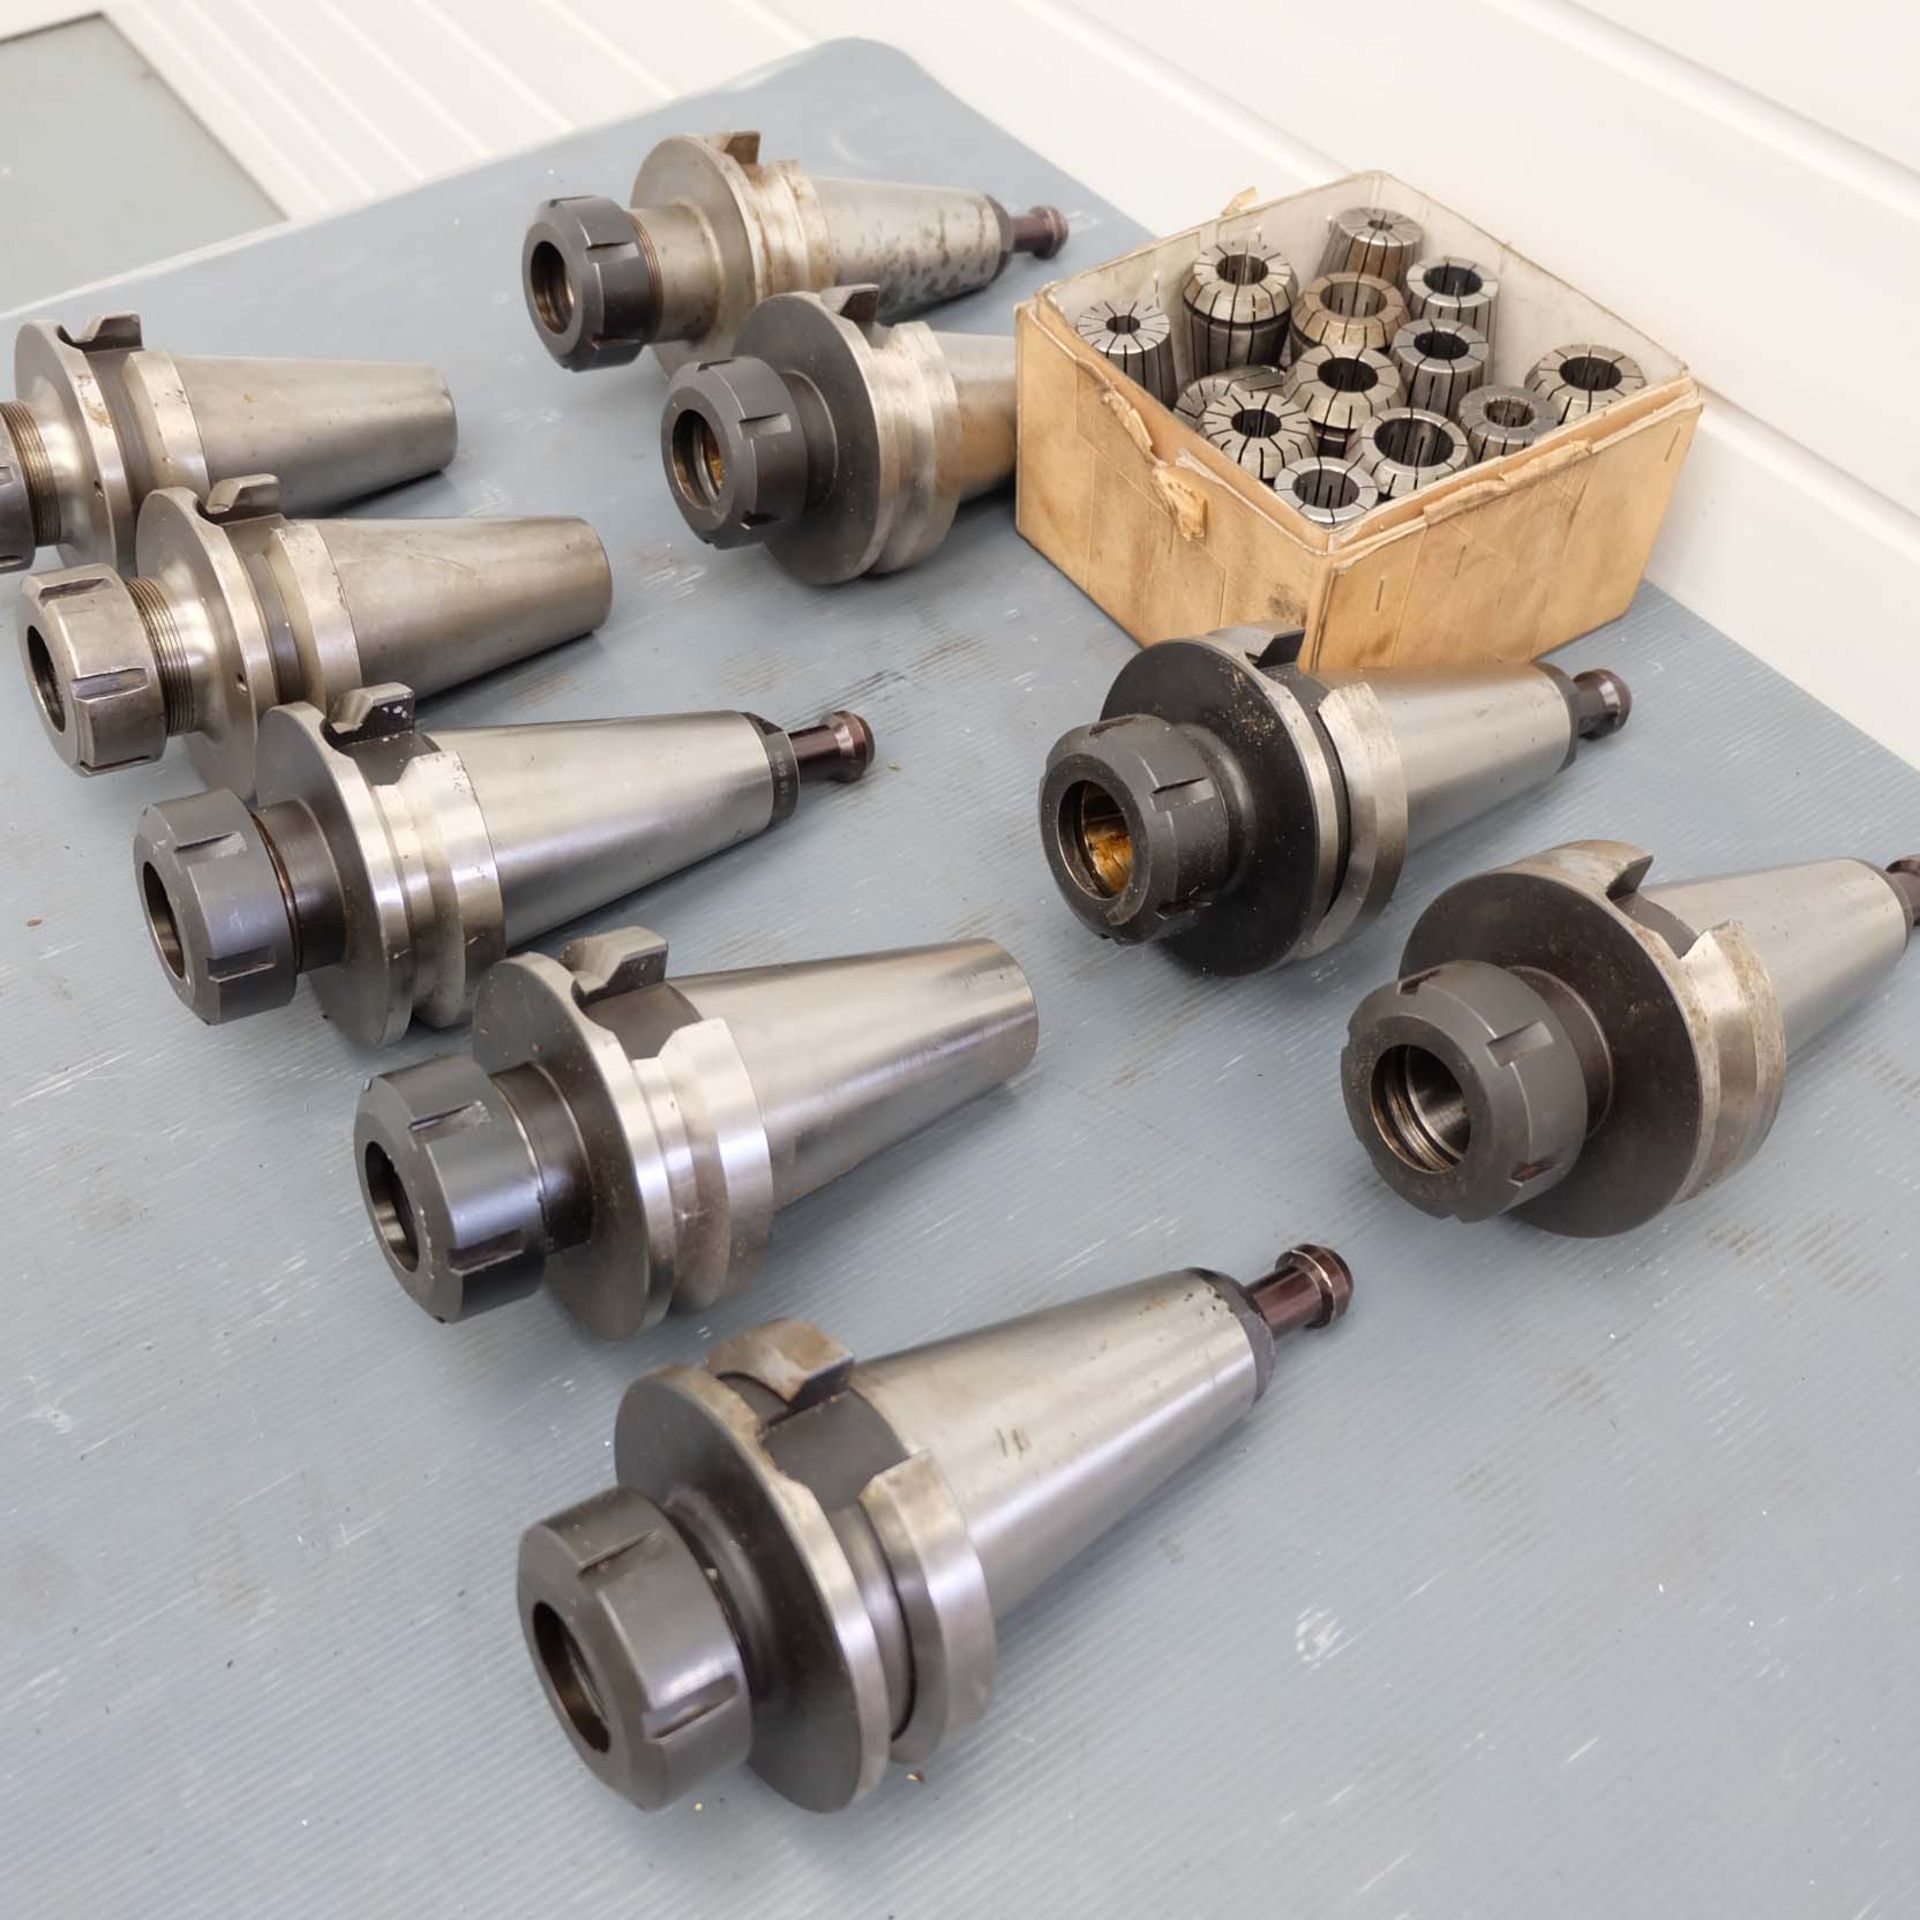 9 x BT50 Spindle Tools. ER40 Collet Holders and Collets. - Image 2 of 4